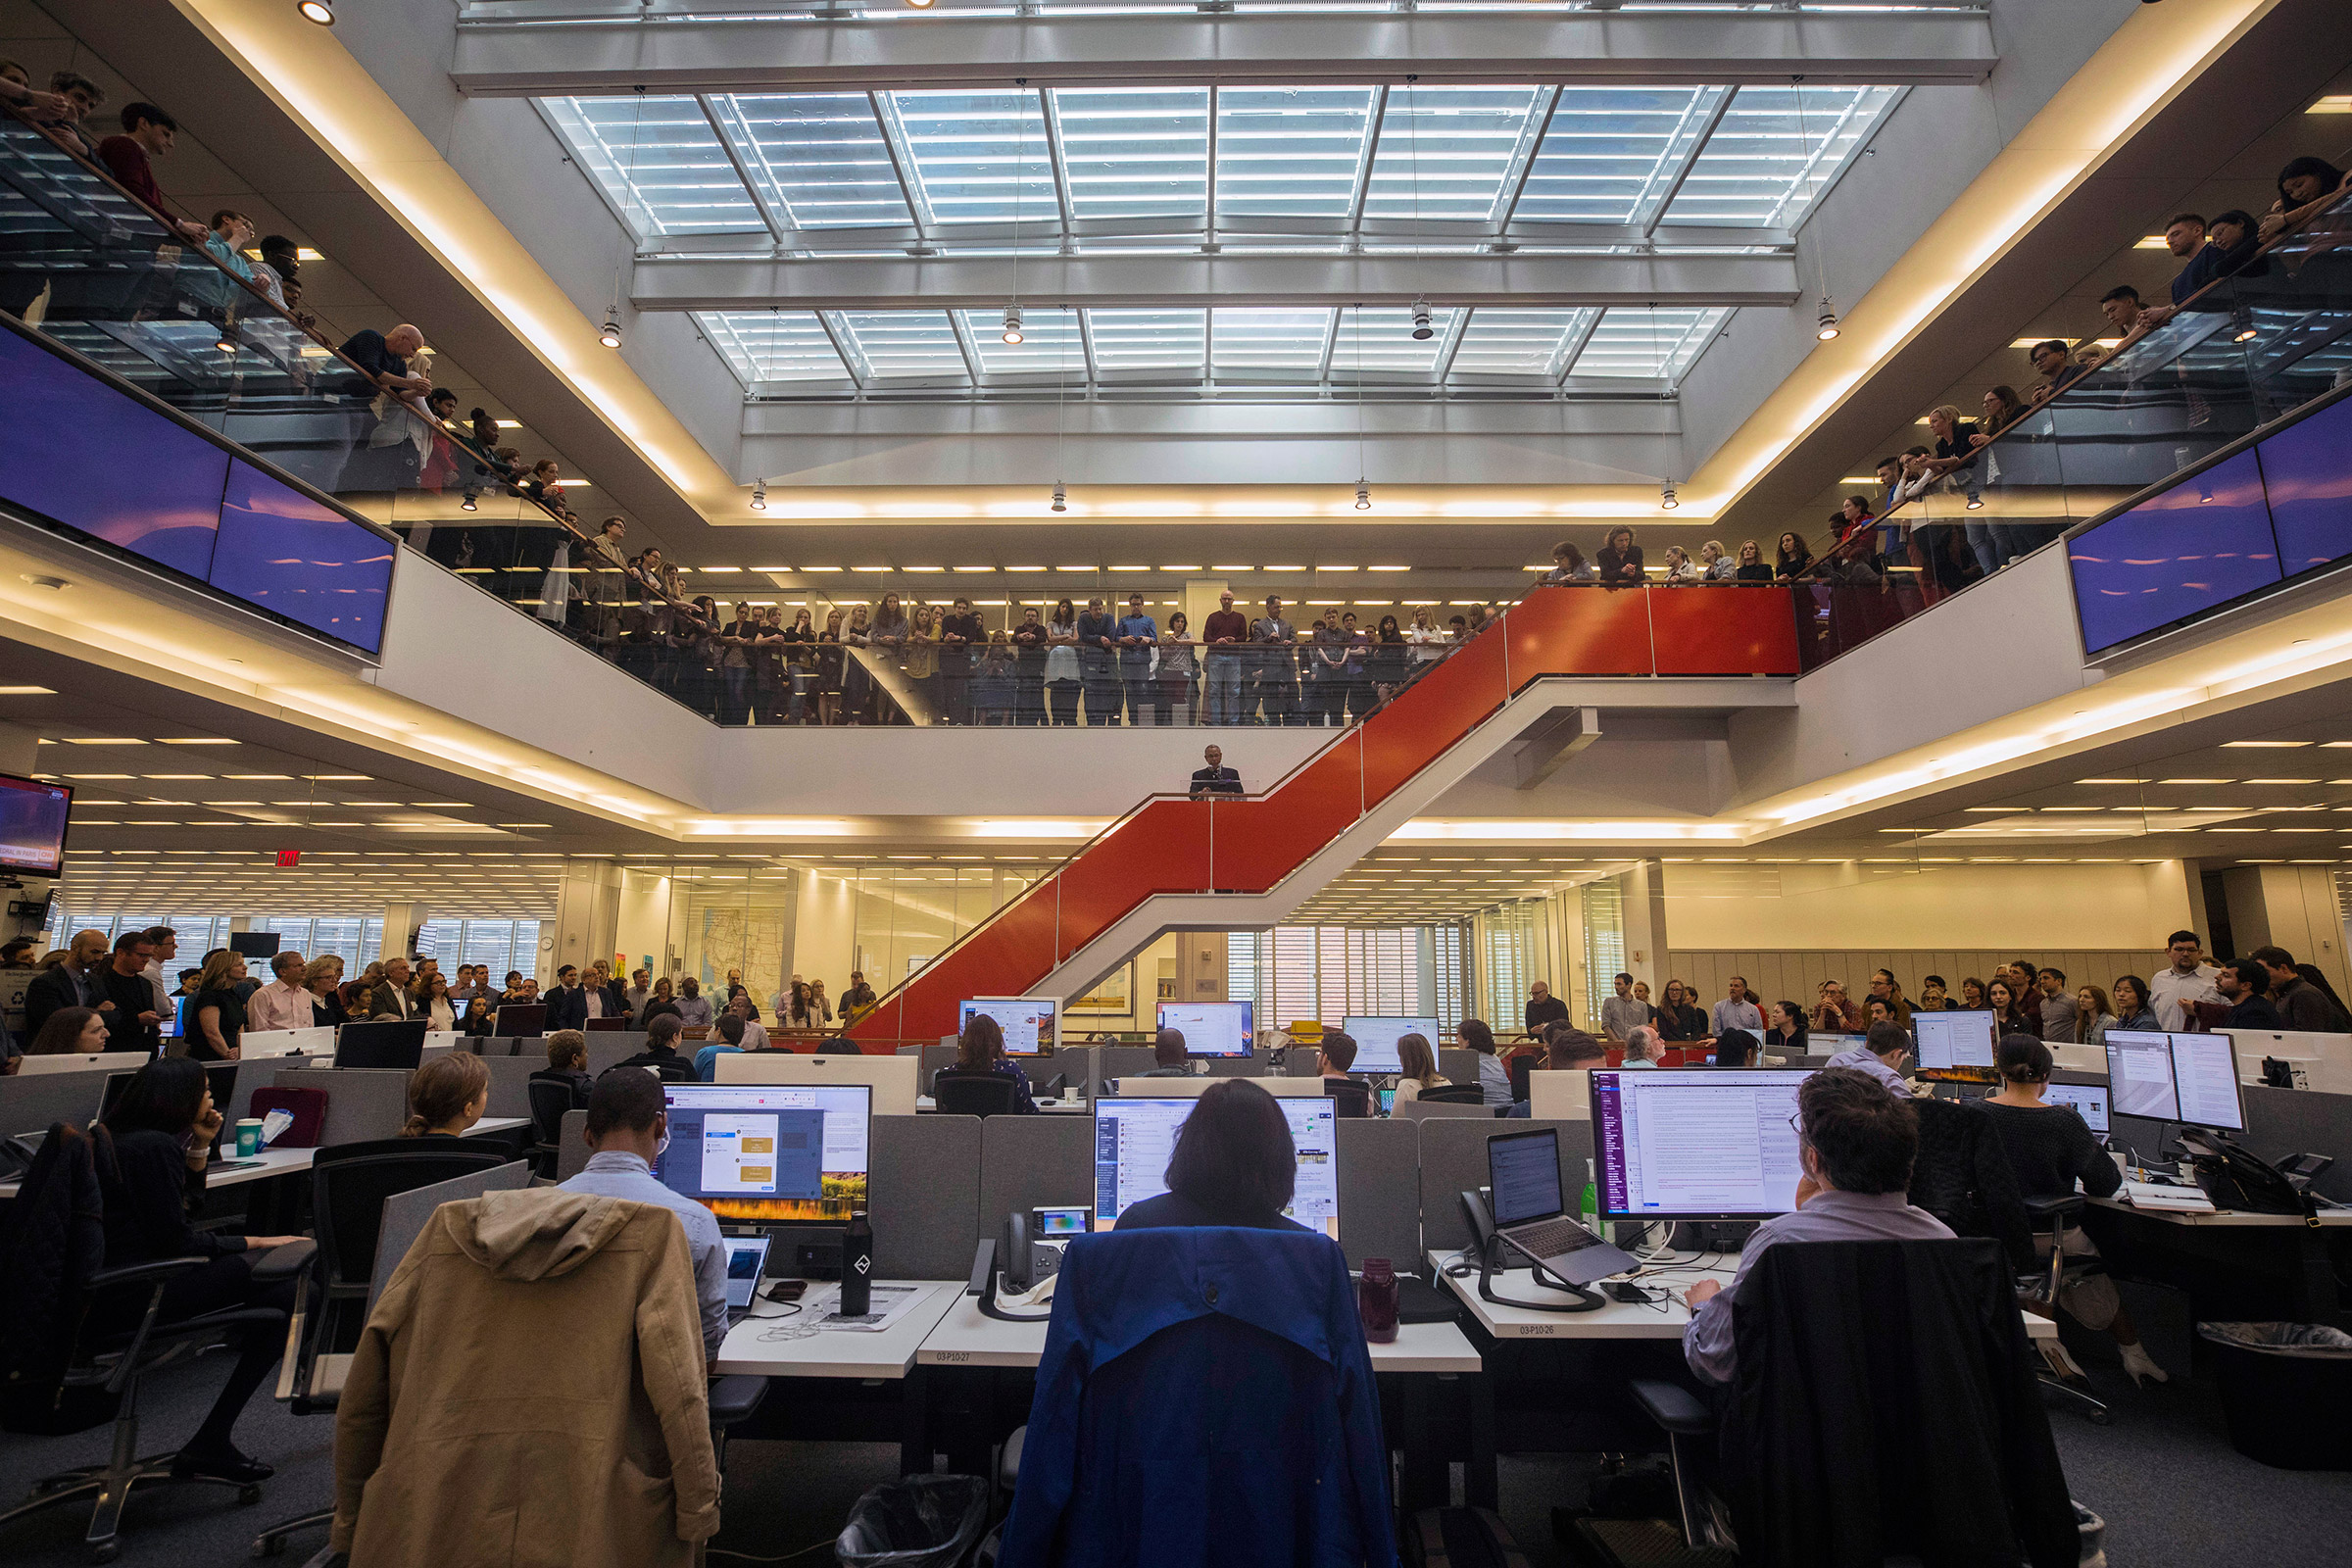 The newsroom gathers in April for Pulitzer announcements